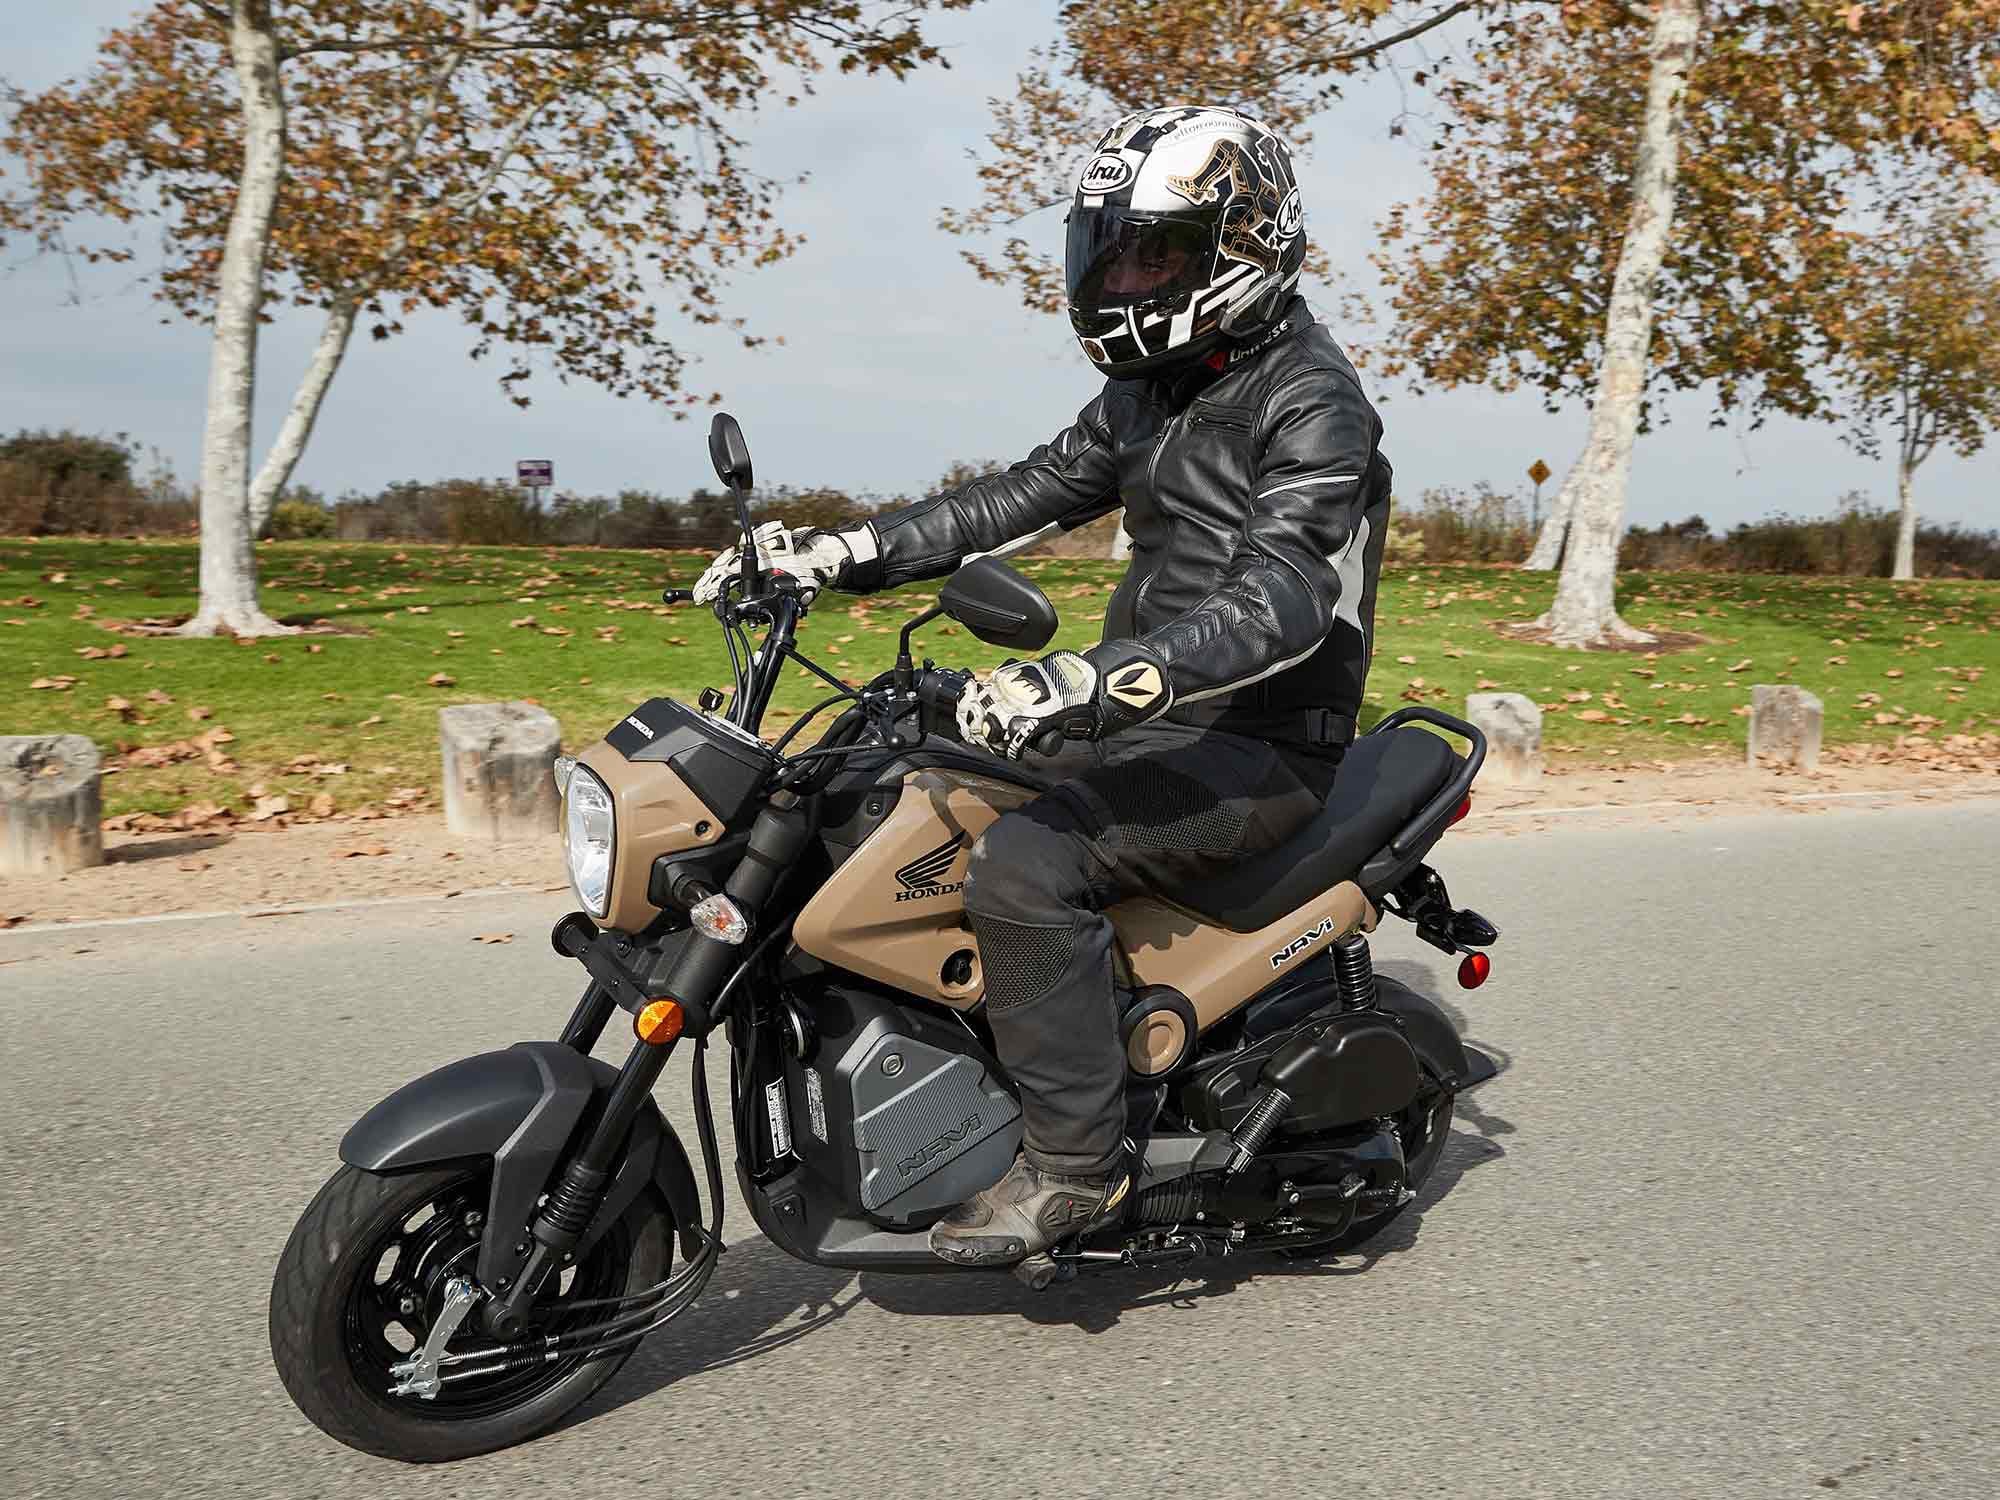 Honda is looking to attract new riders with the Honda Navi; a price well below $2,000 makes it attractive to more than newbies.